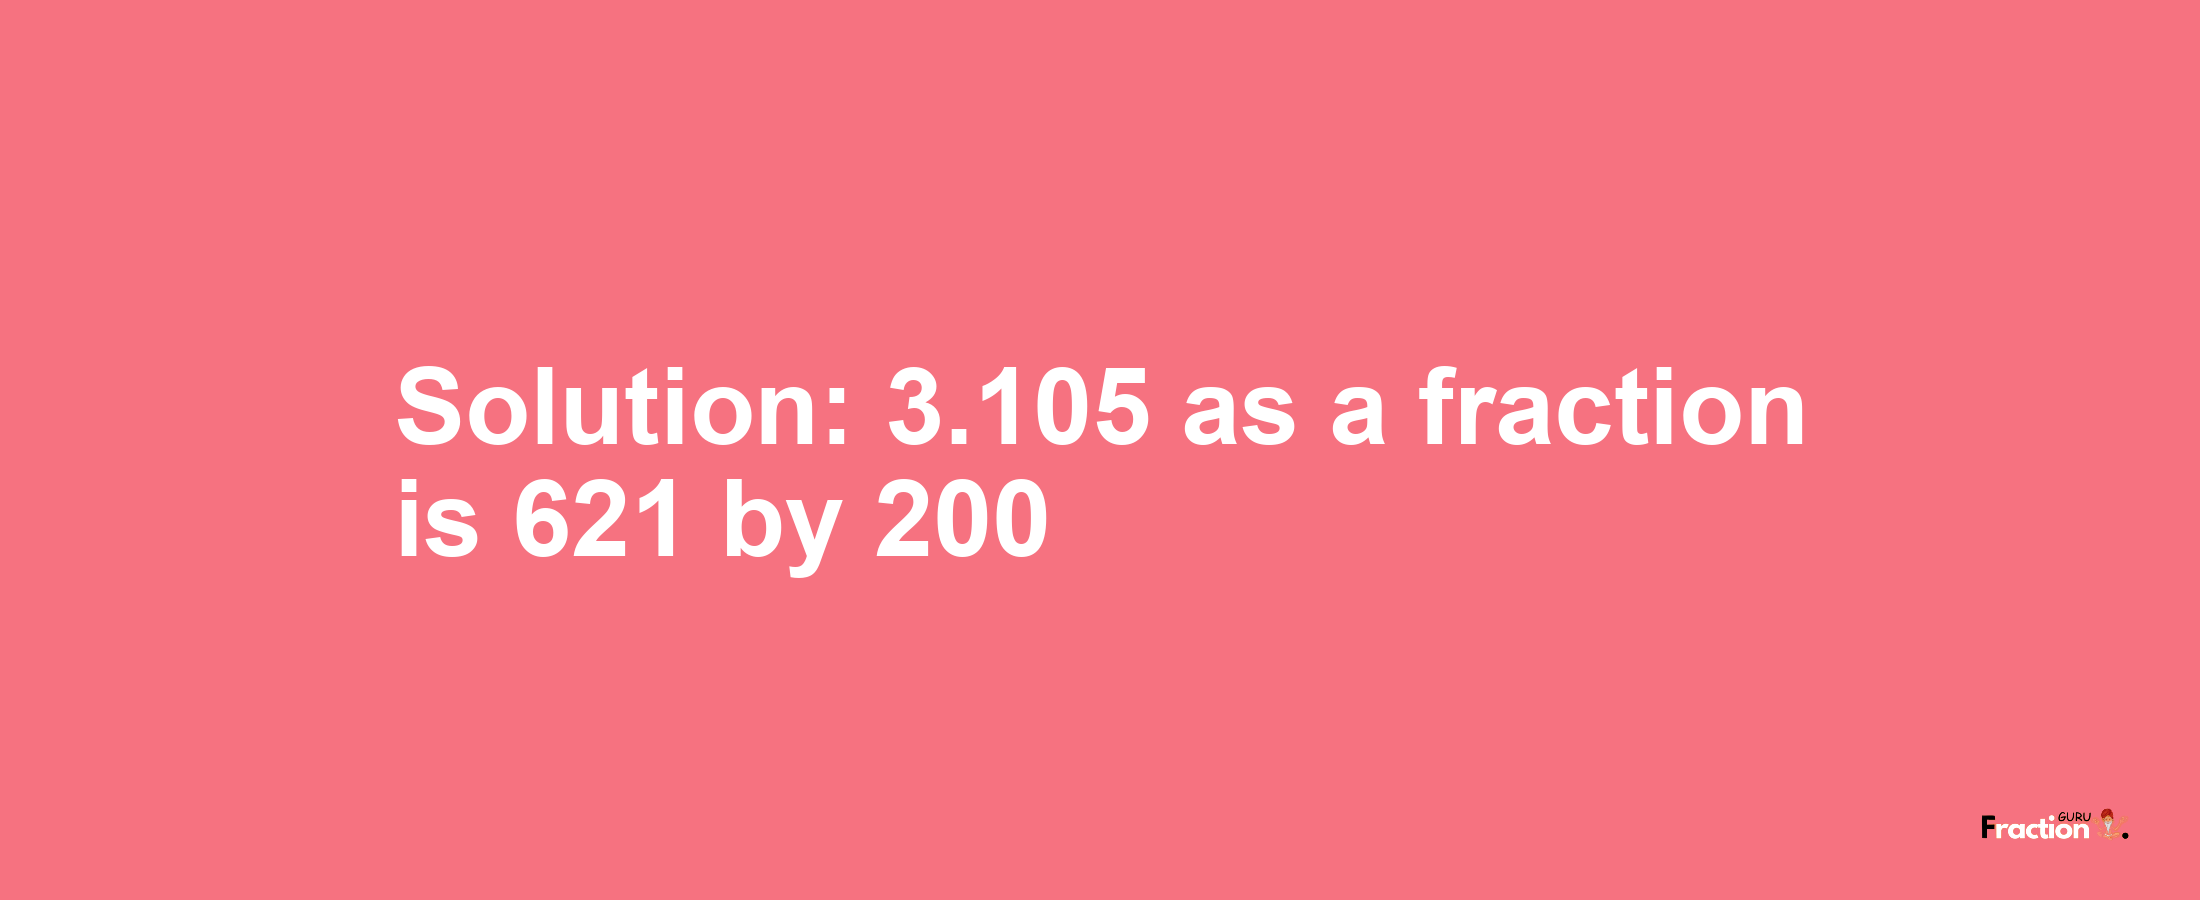 Solution:3.105 as a fraction is 621/200